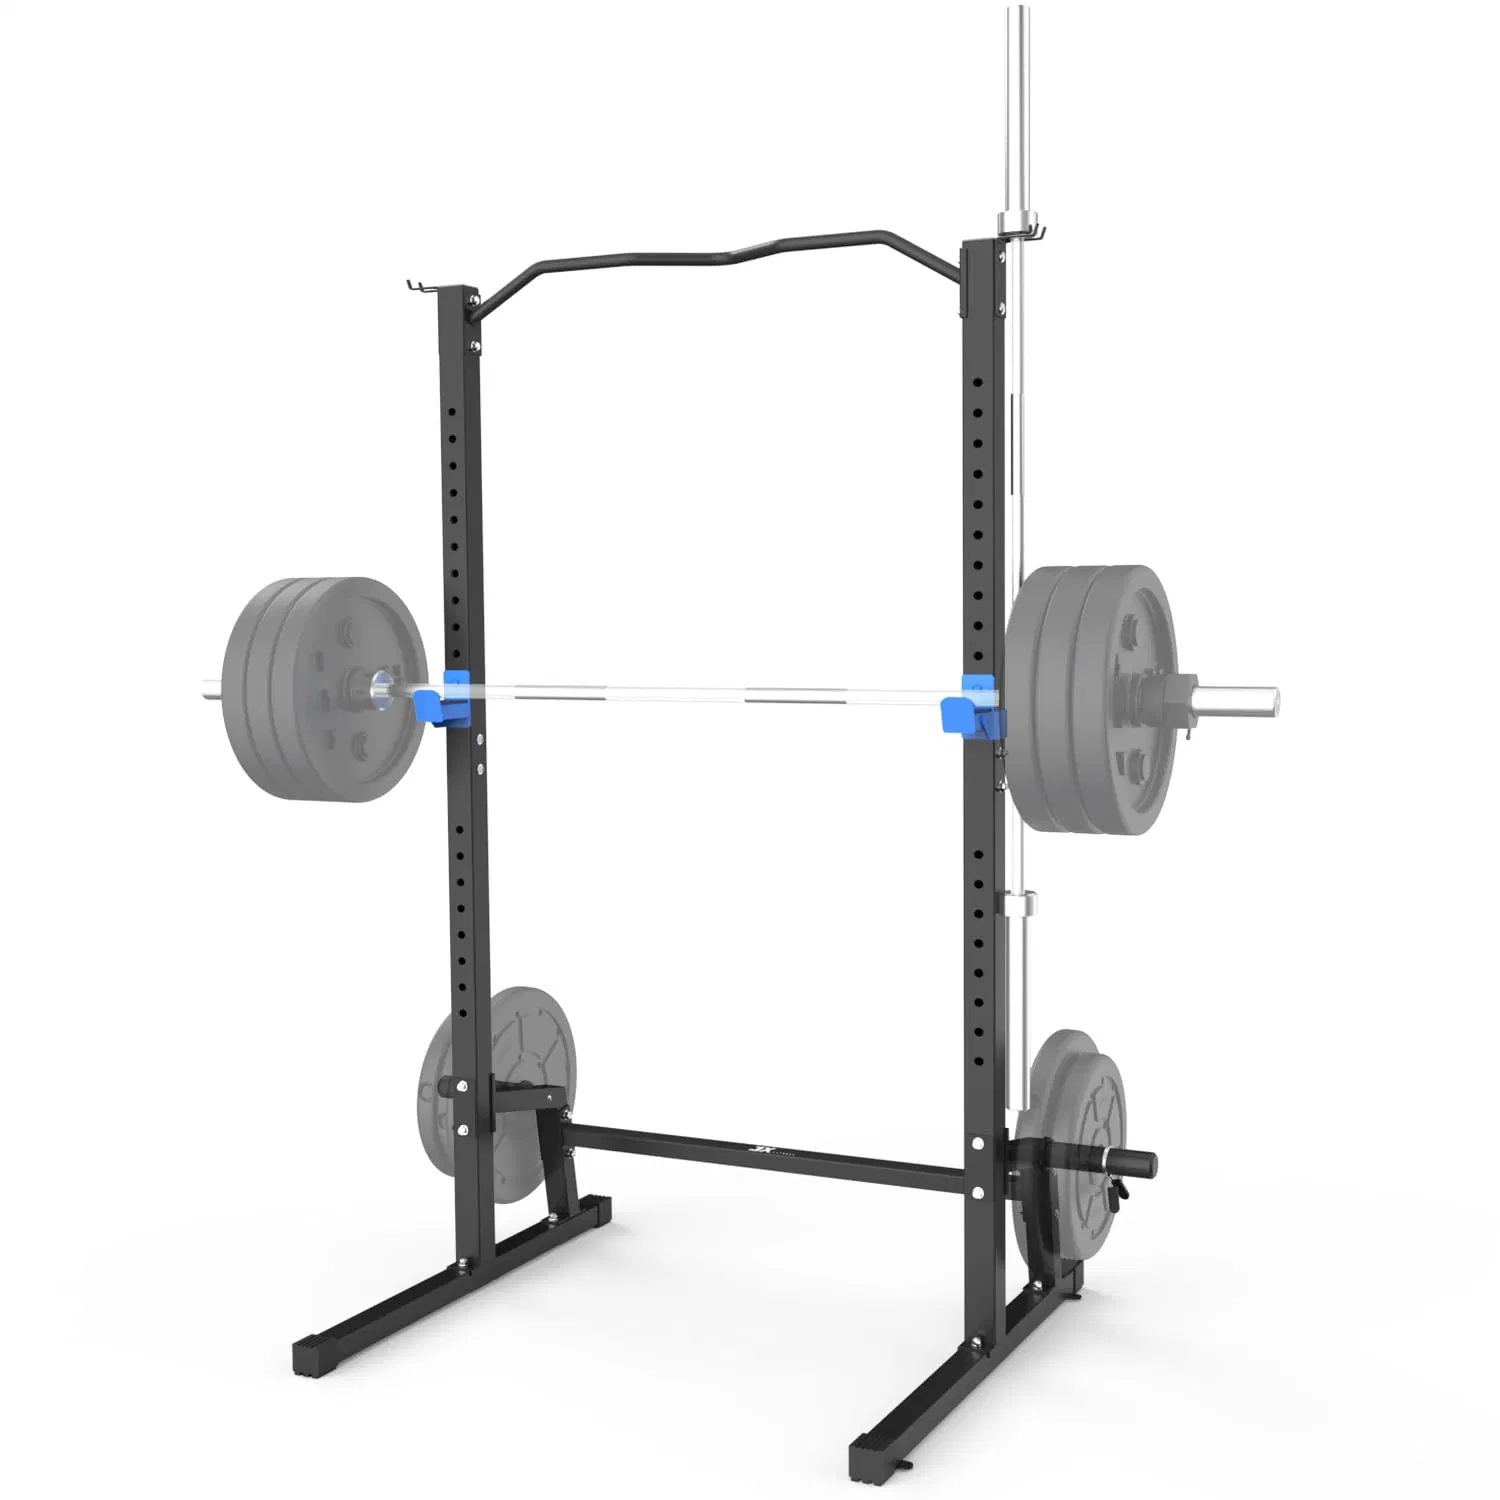 Hotselling Gym Fitness Equipment Adjustable High Quality Barbell Squat Rack